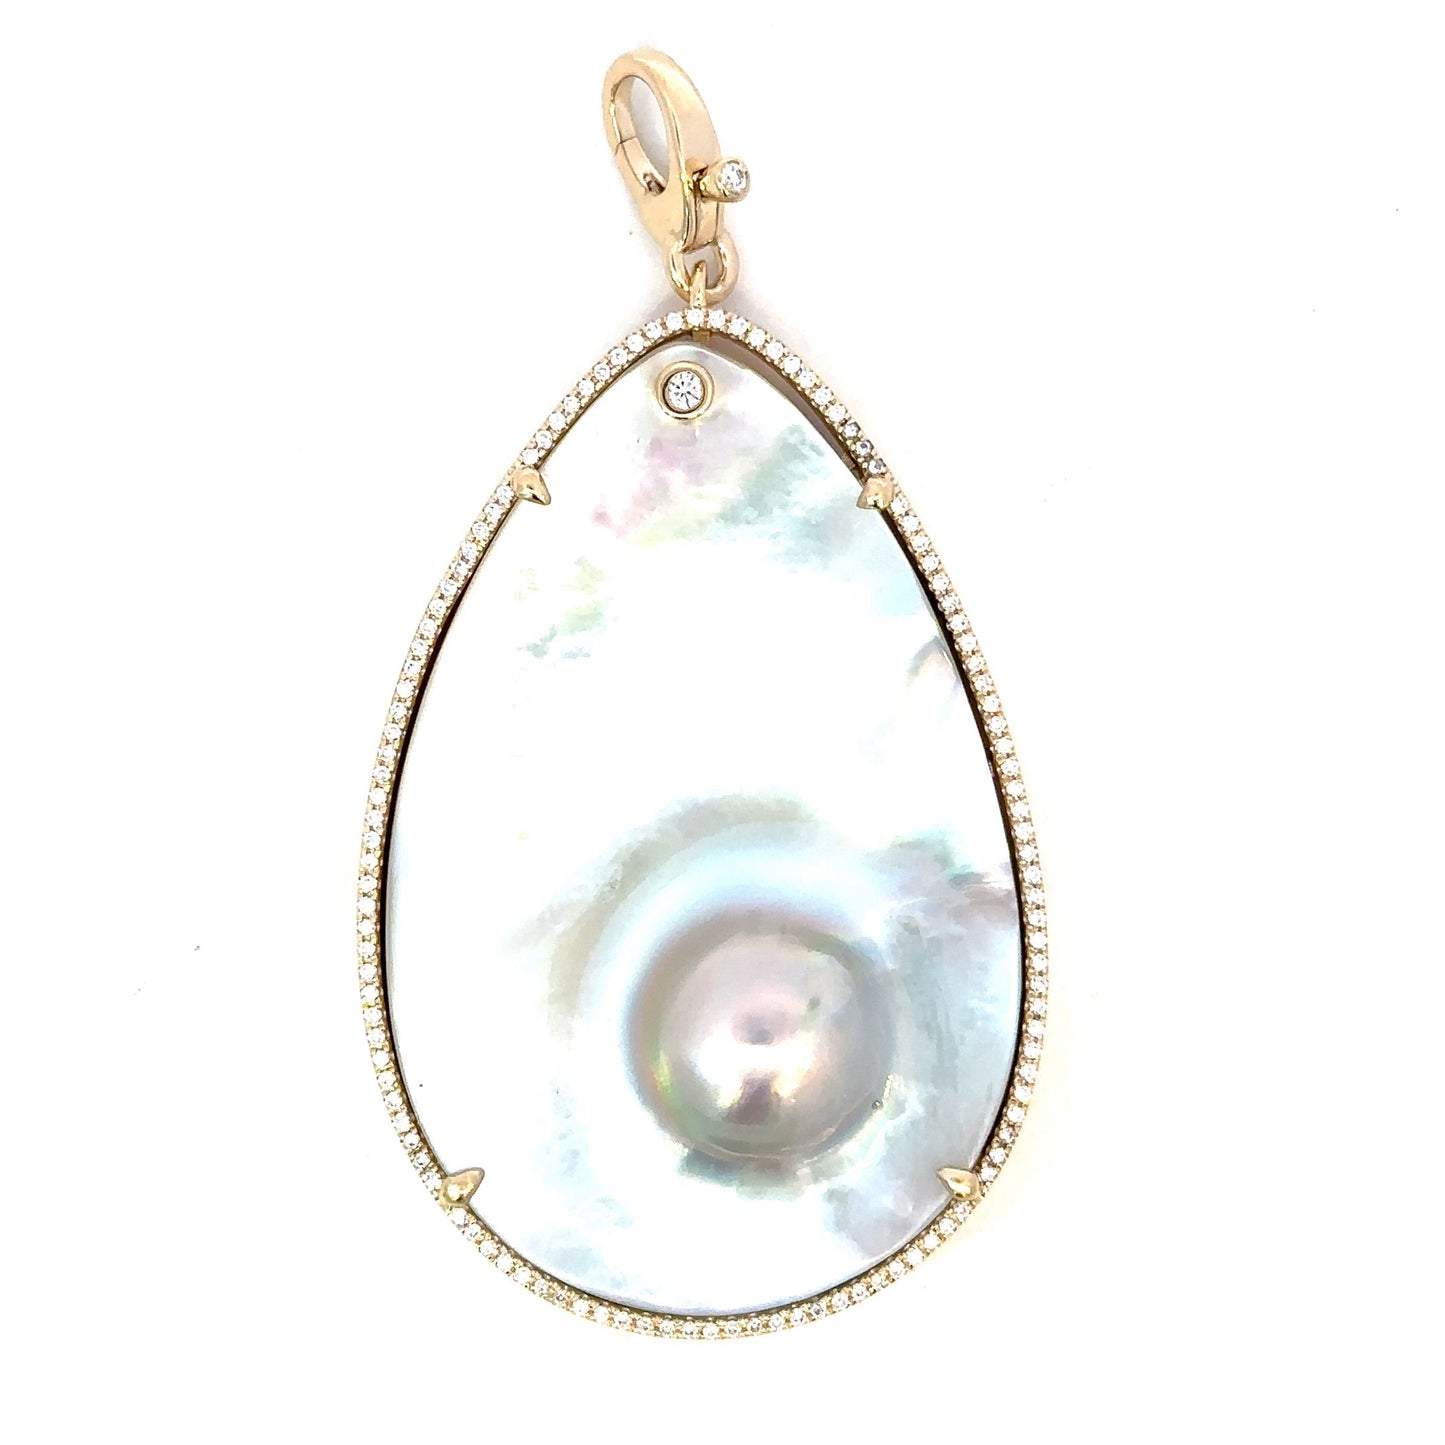 Yellow Gold Mabe Pearl Pendant with Clip on Bail and Pave Border